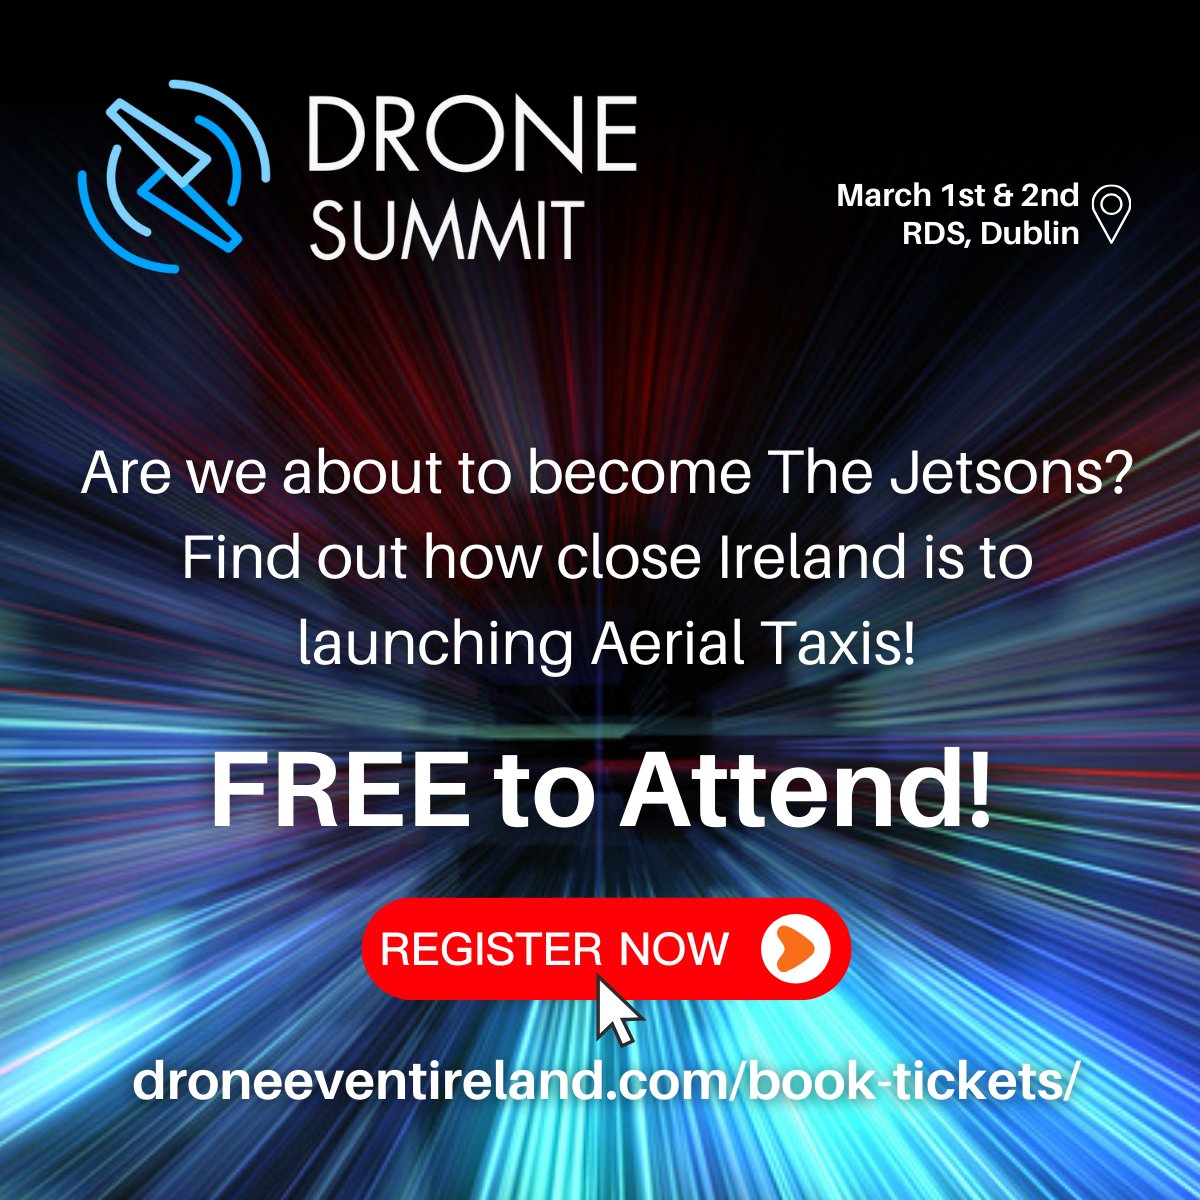 Ever wondered if we're on the brink of The Jetsons era? 🚀

Join us at the Drone Summit & Expo and find out how close Ireland is to launching Aerial Taxis.

It's FREE to attend – register now! droneeventireland.com/register/

#NationalDroneSummit #DroneInnovation #FutureTech